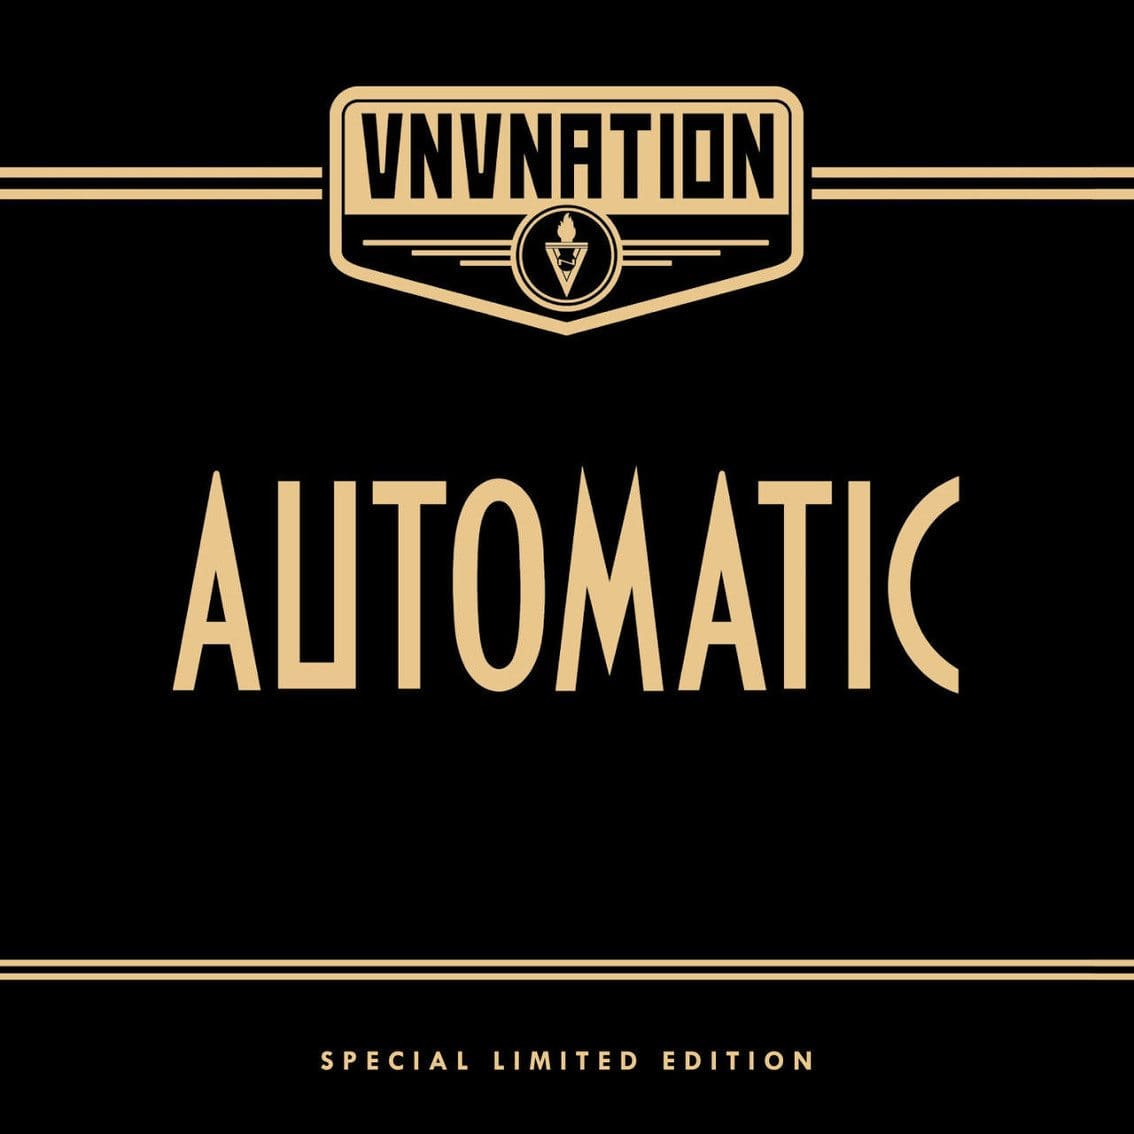 VNV Nation reissues 'Automatic' on double vinyl (clear/transparent + black) - limited number of copies available